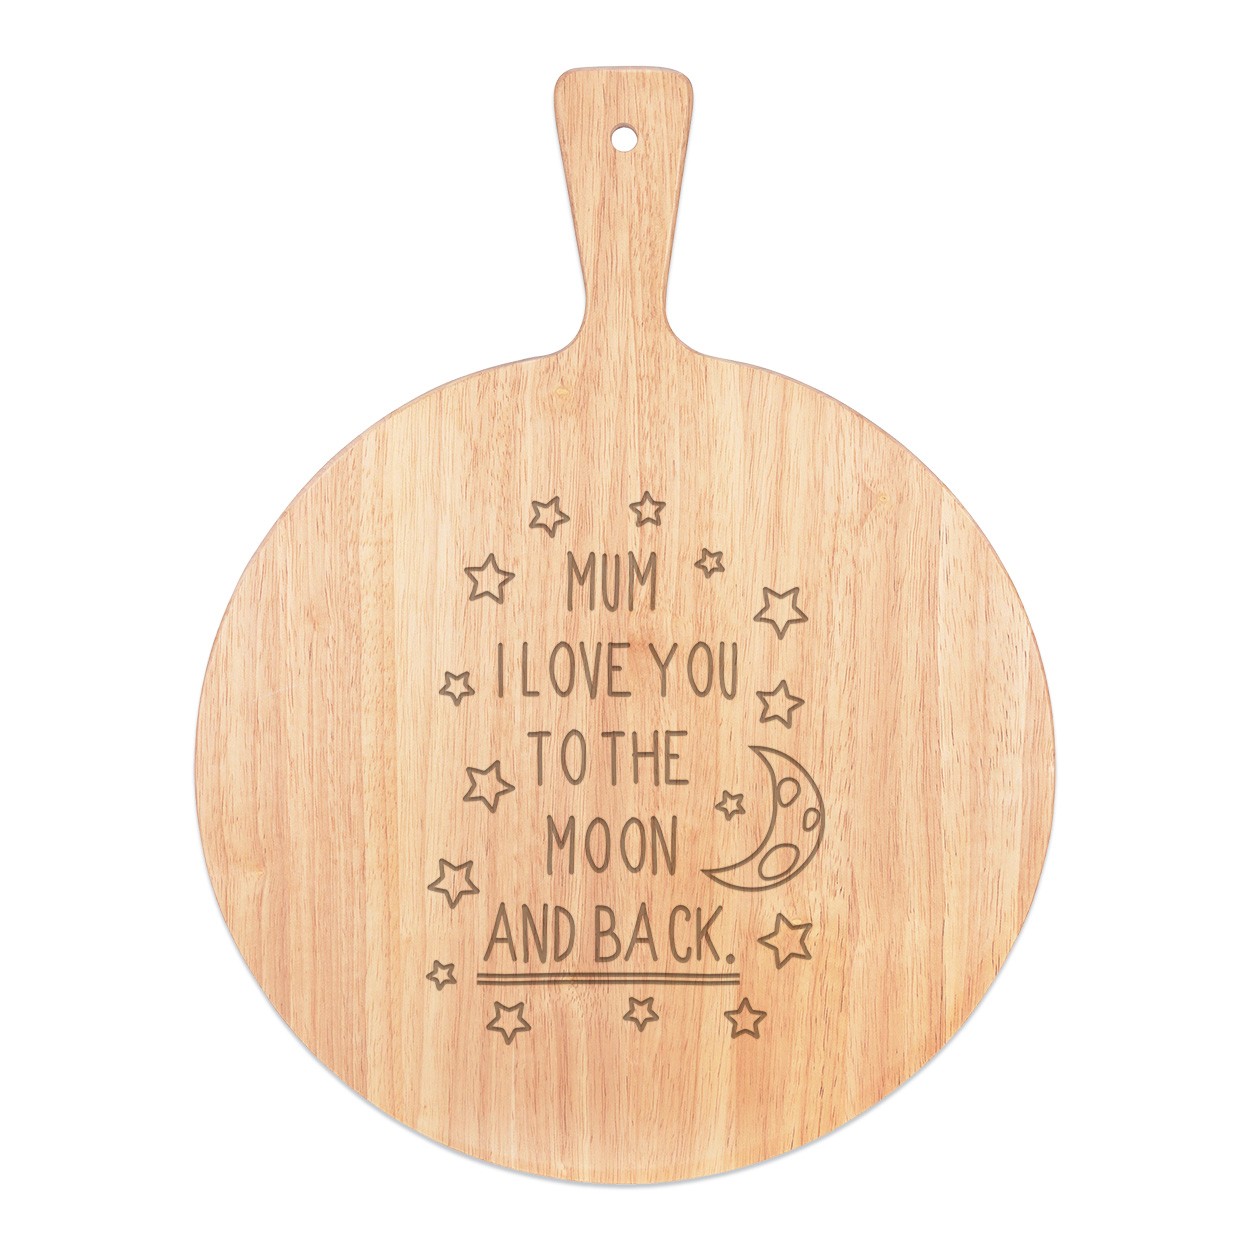 Mum I Love You To The Moon And Back Pizza Board Paddle Serving Tray Handle Round Wooden 45x34cm